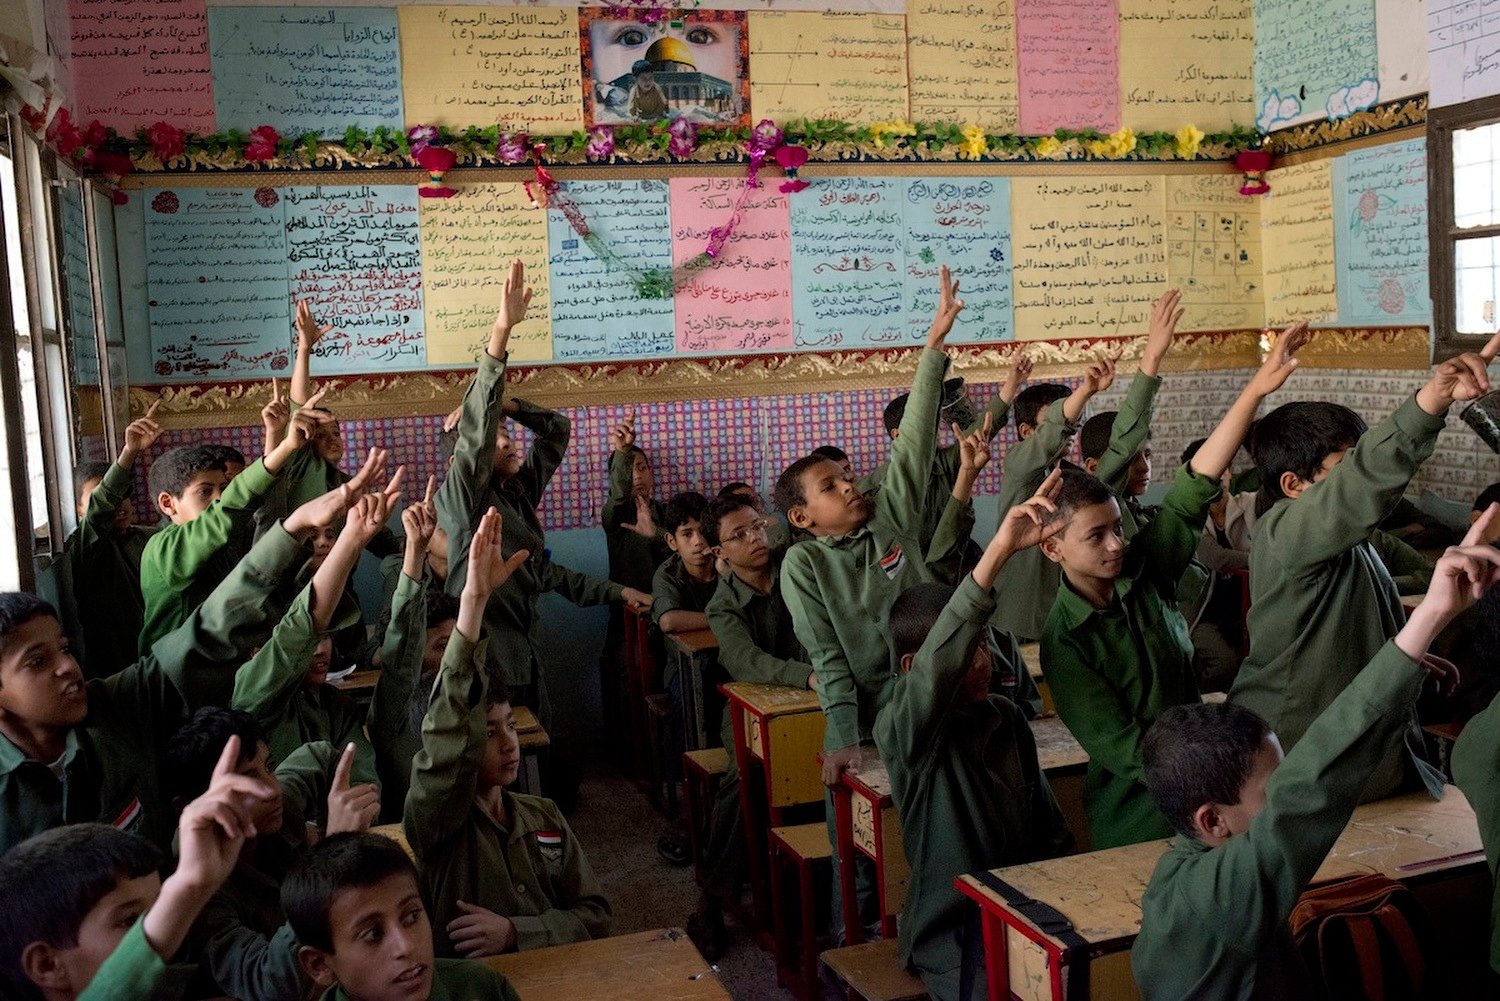 Yemeni boys raise their hands eagerly to answer a question in class. Their classroom in the Houthi-controlled area of Sa'ada is better supplied than most schools in Sana'a.